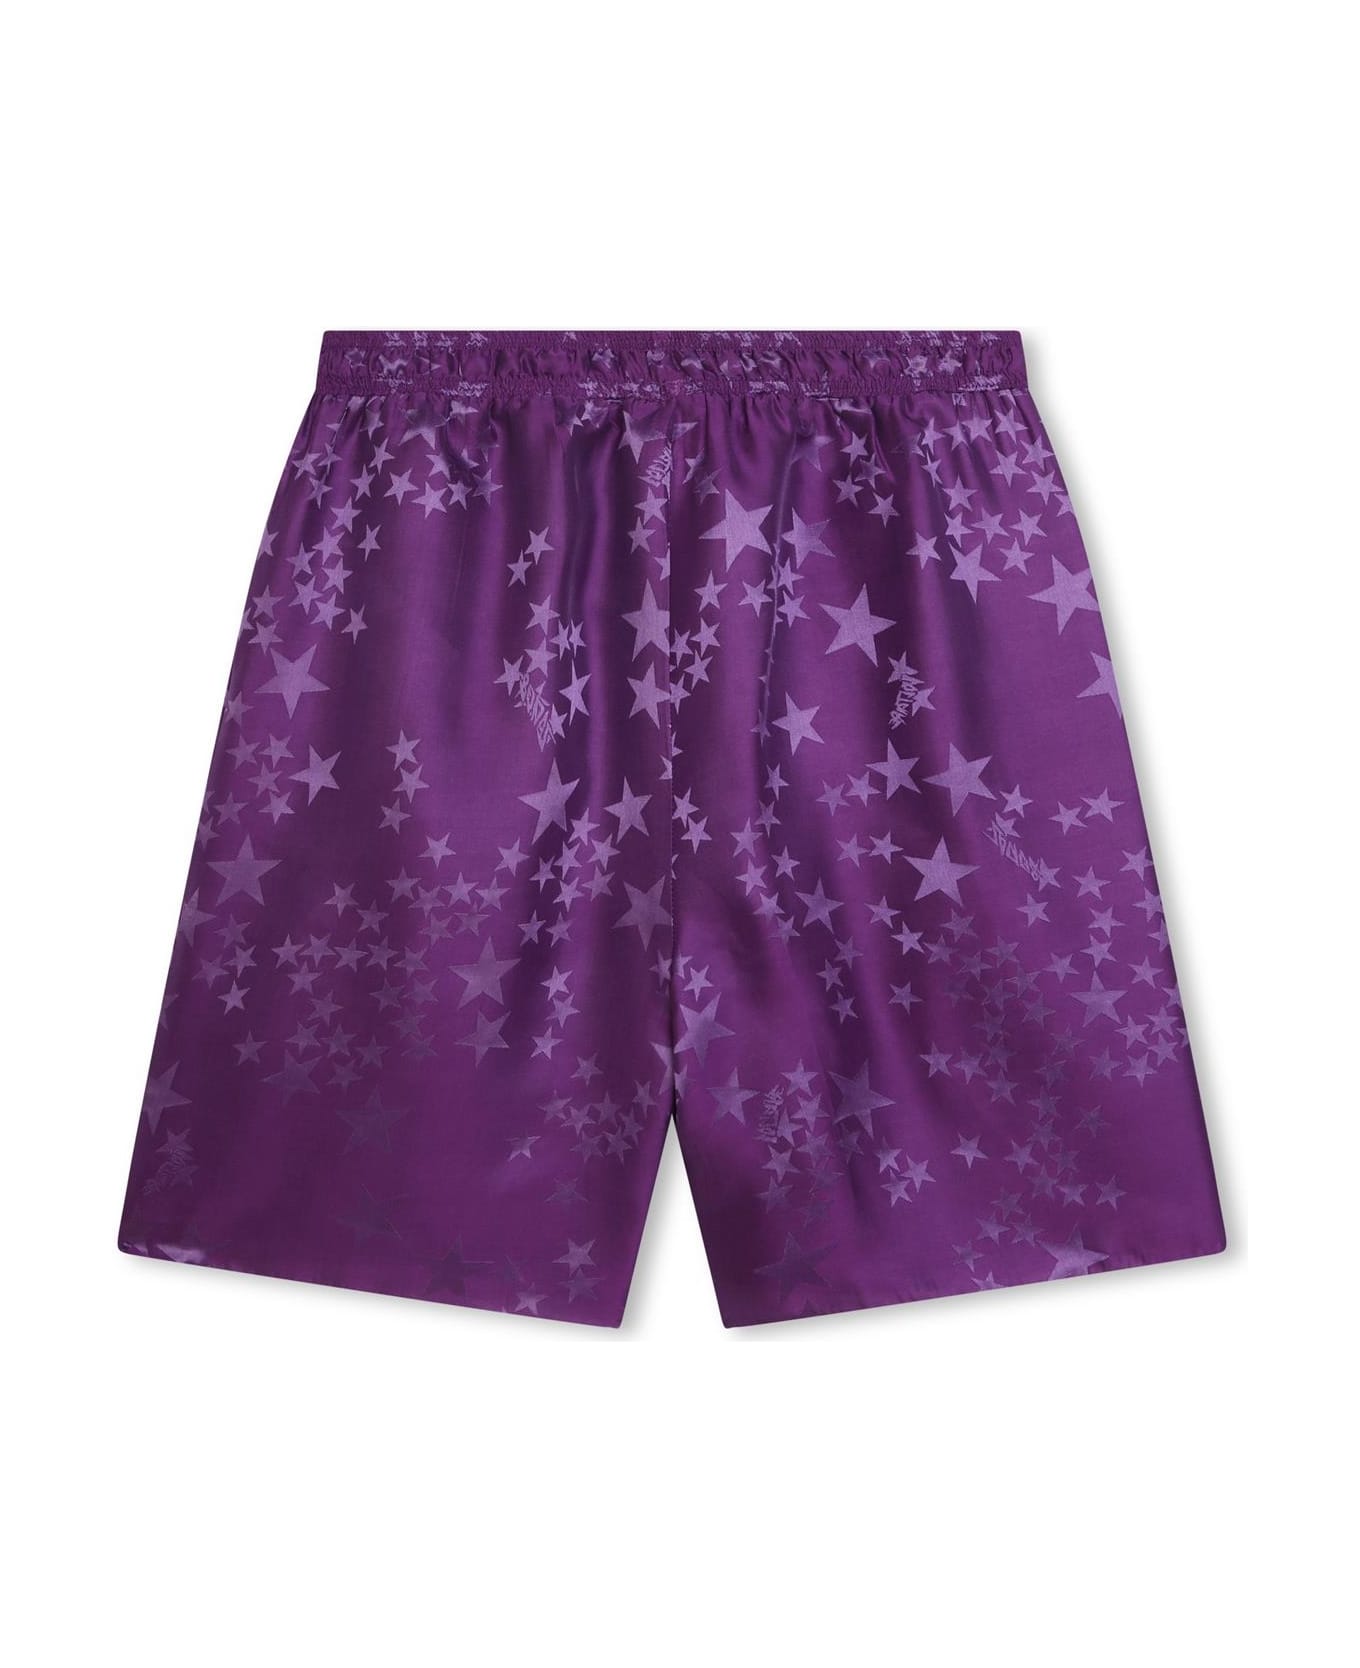 Zadig & Voltaire Shorts A Stelle - Violet ボトムス